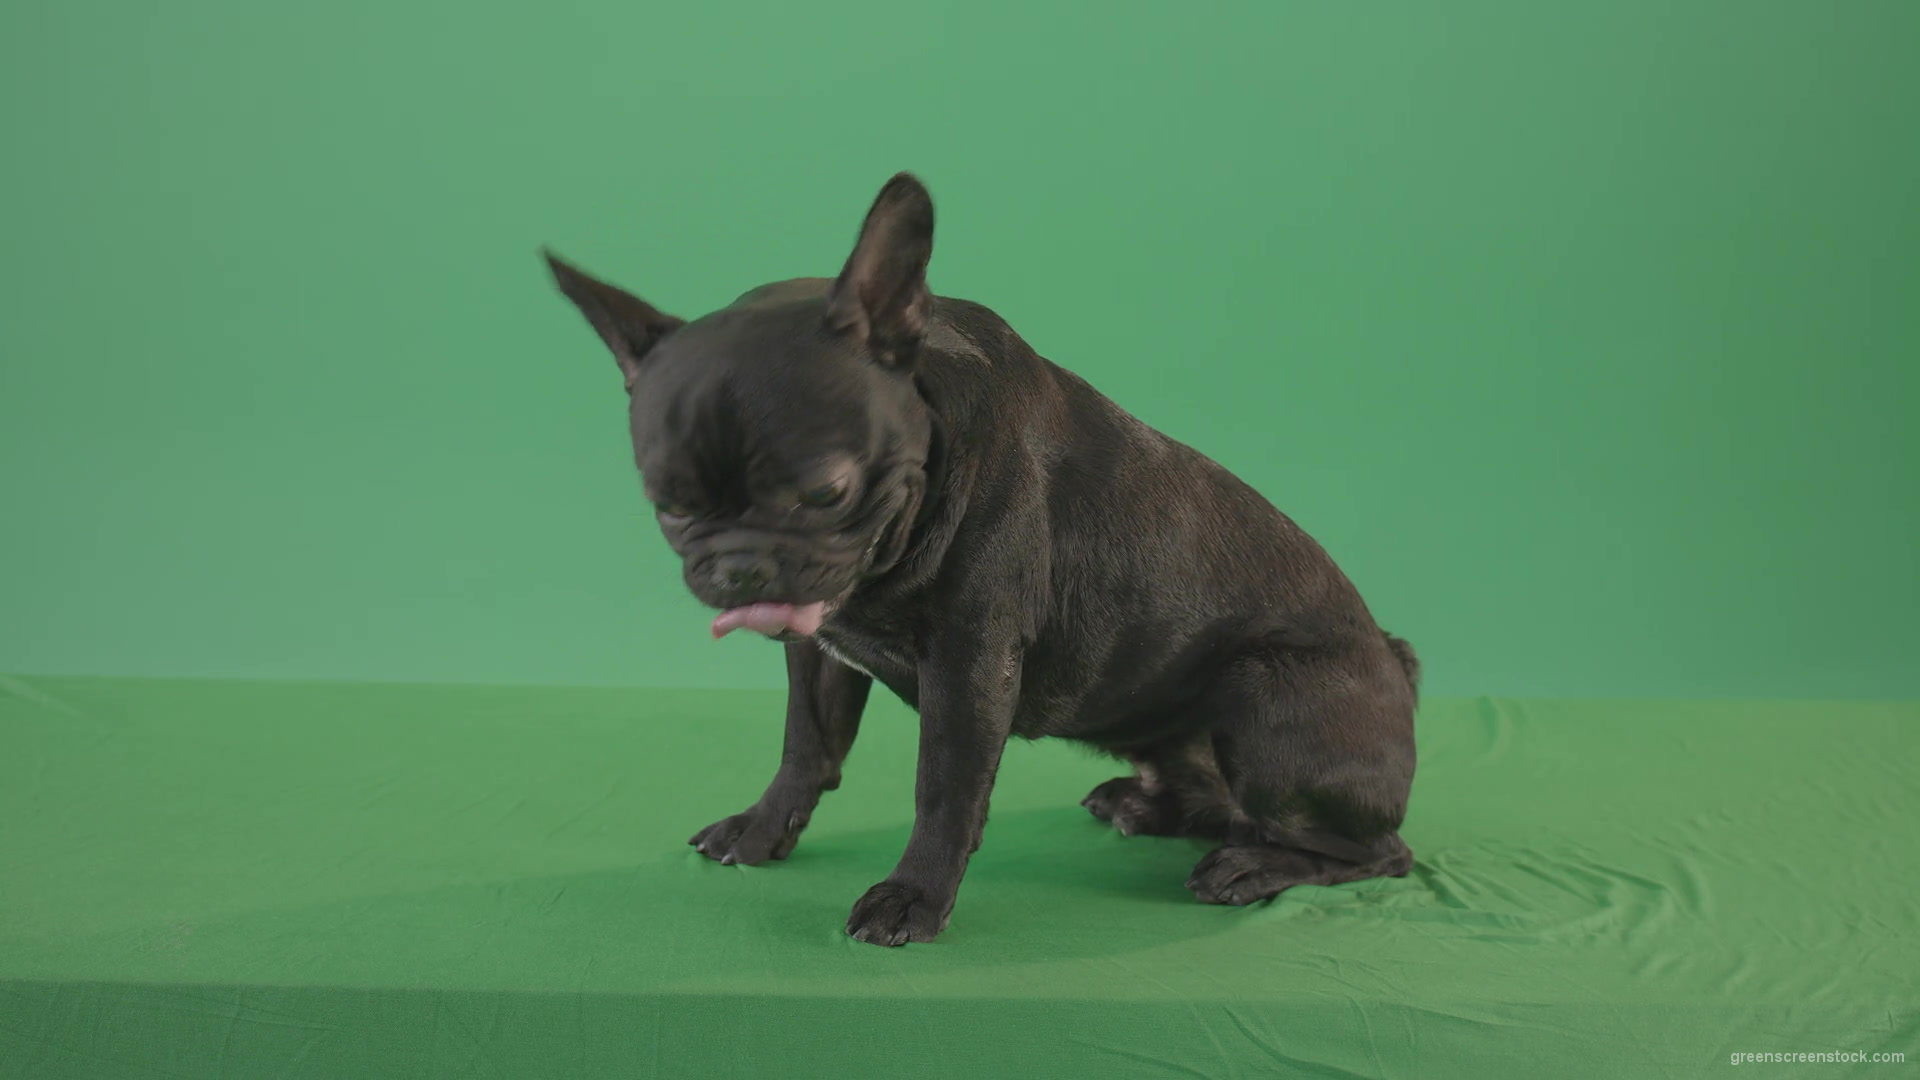 Small-French-bull-dog-posing-in-side-view-on-green-screen-4K-Video-Footage--1920_006 Green Screen Stock